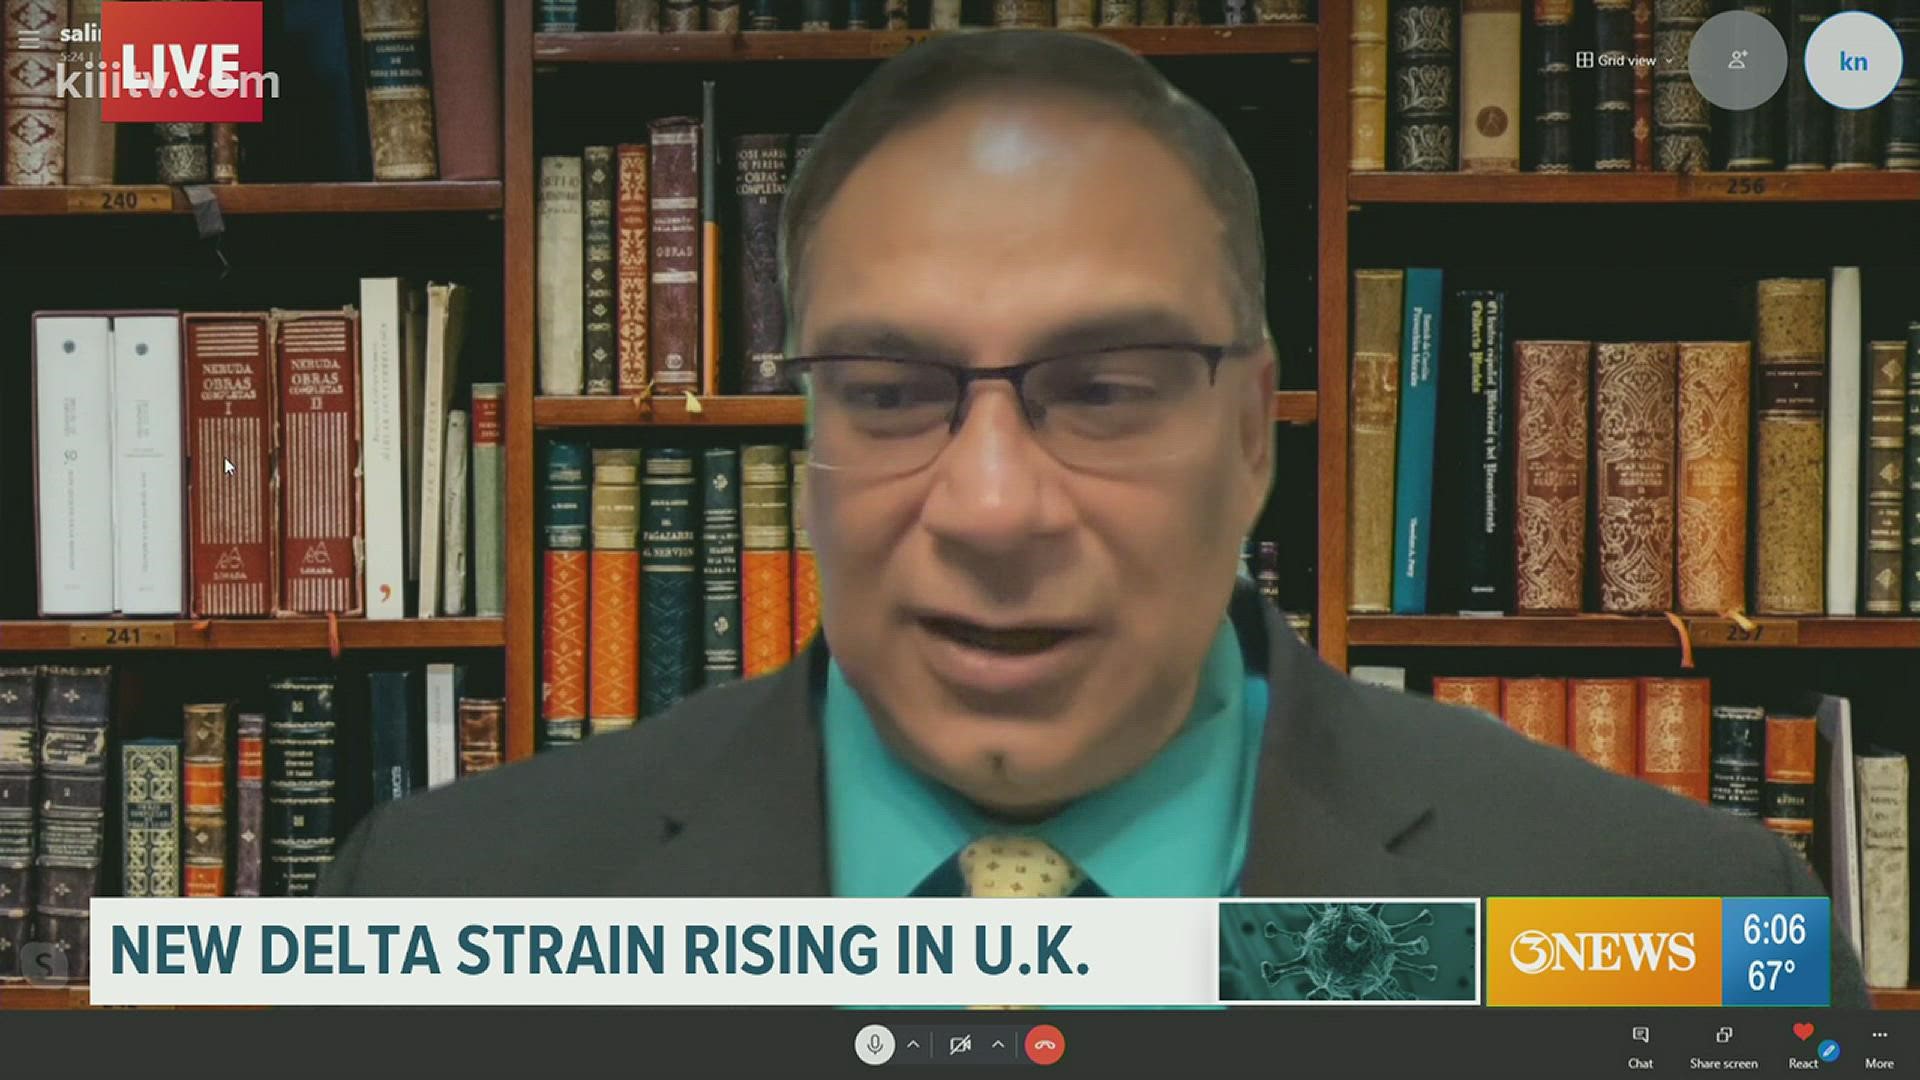 Dr. Surani joined First Edition to talk about the Delta subvariant seen in the UK.